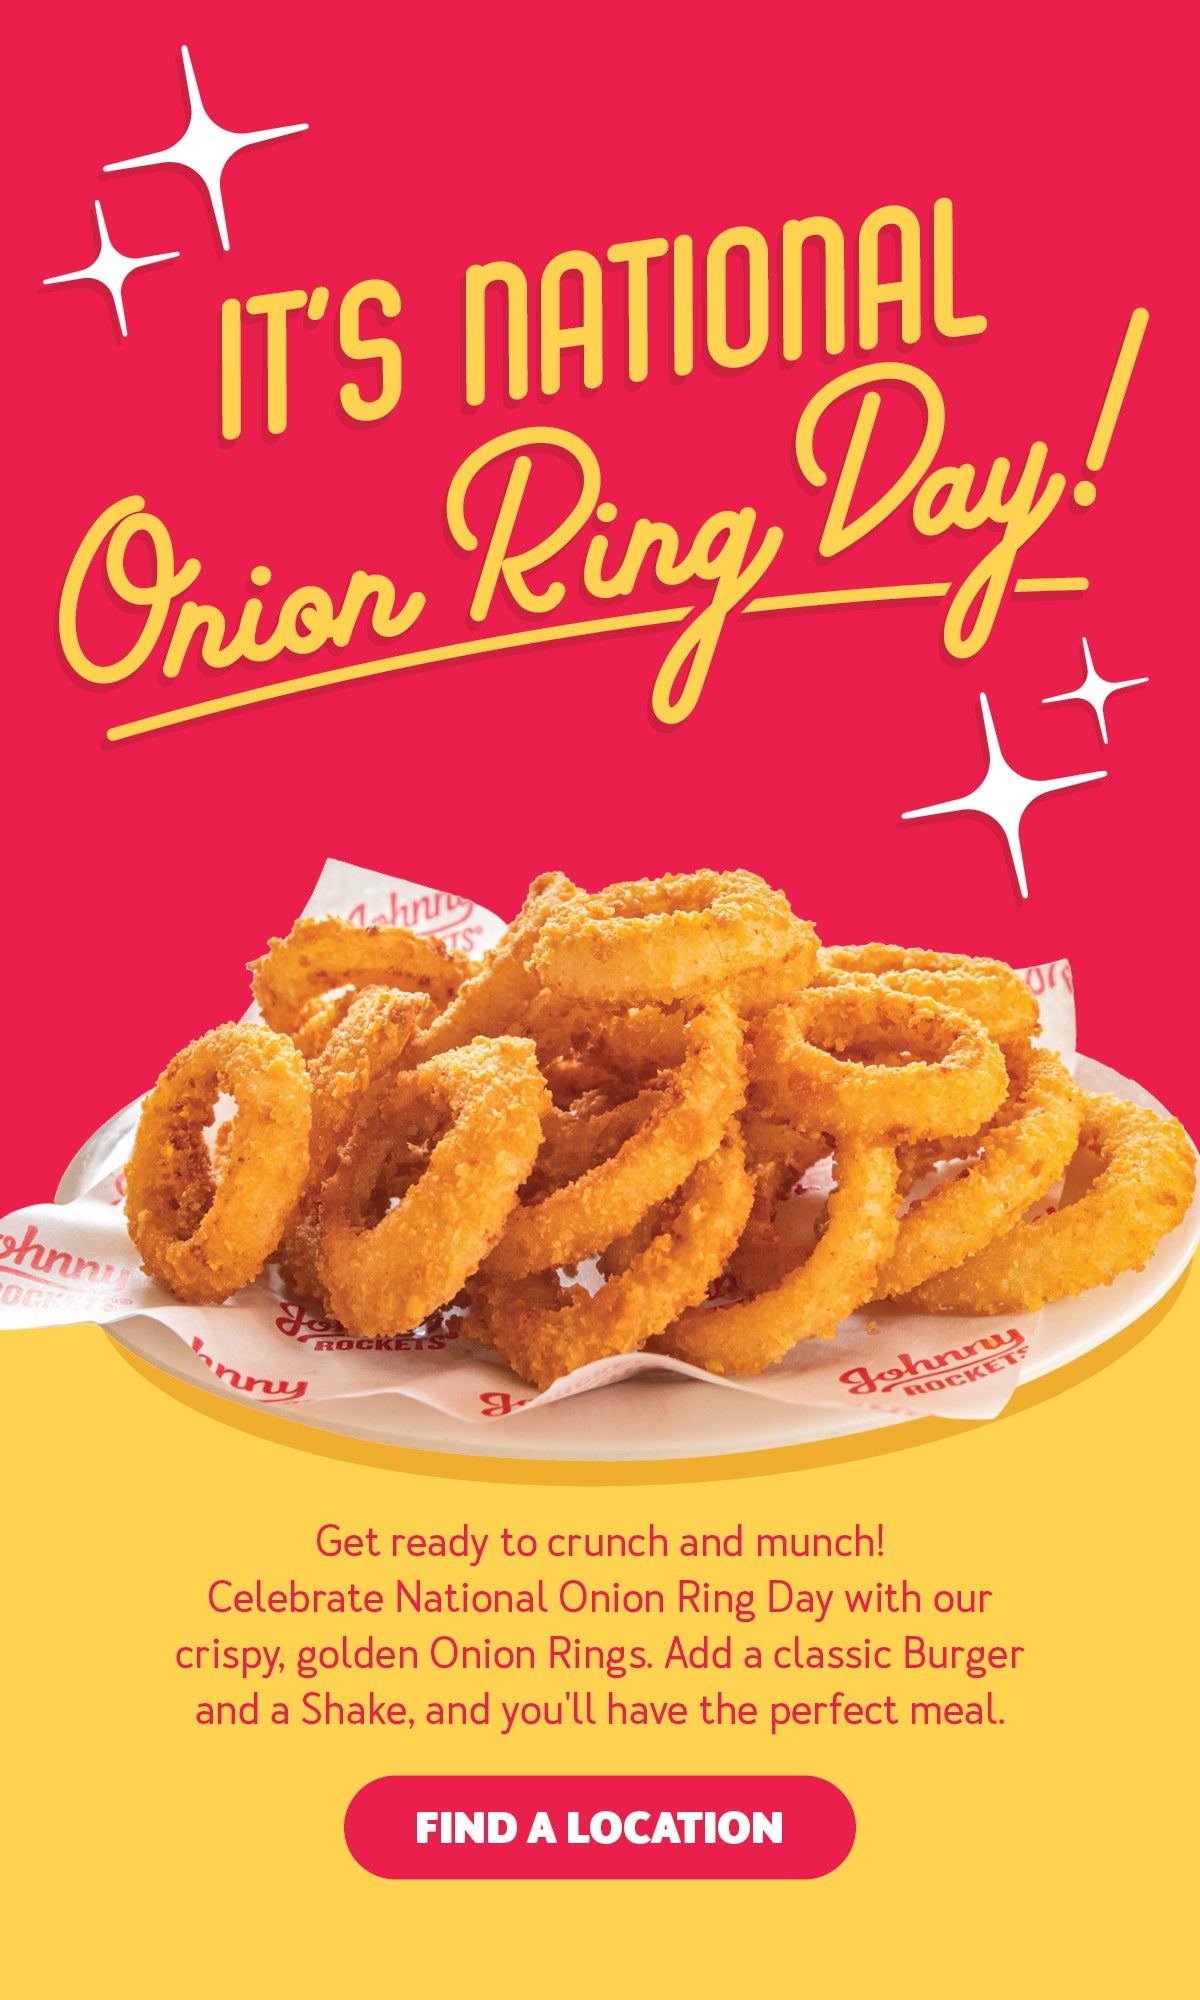 Celebrate National Onion Ring Day at Johnny Rockets!